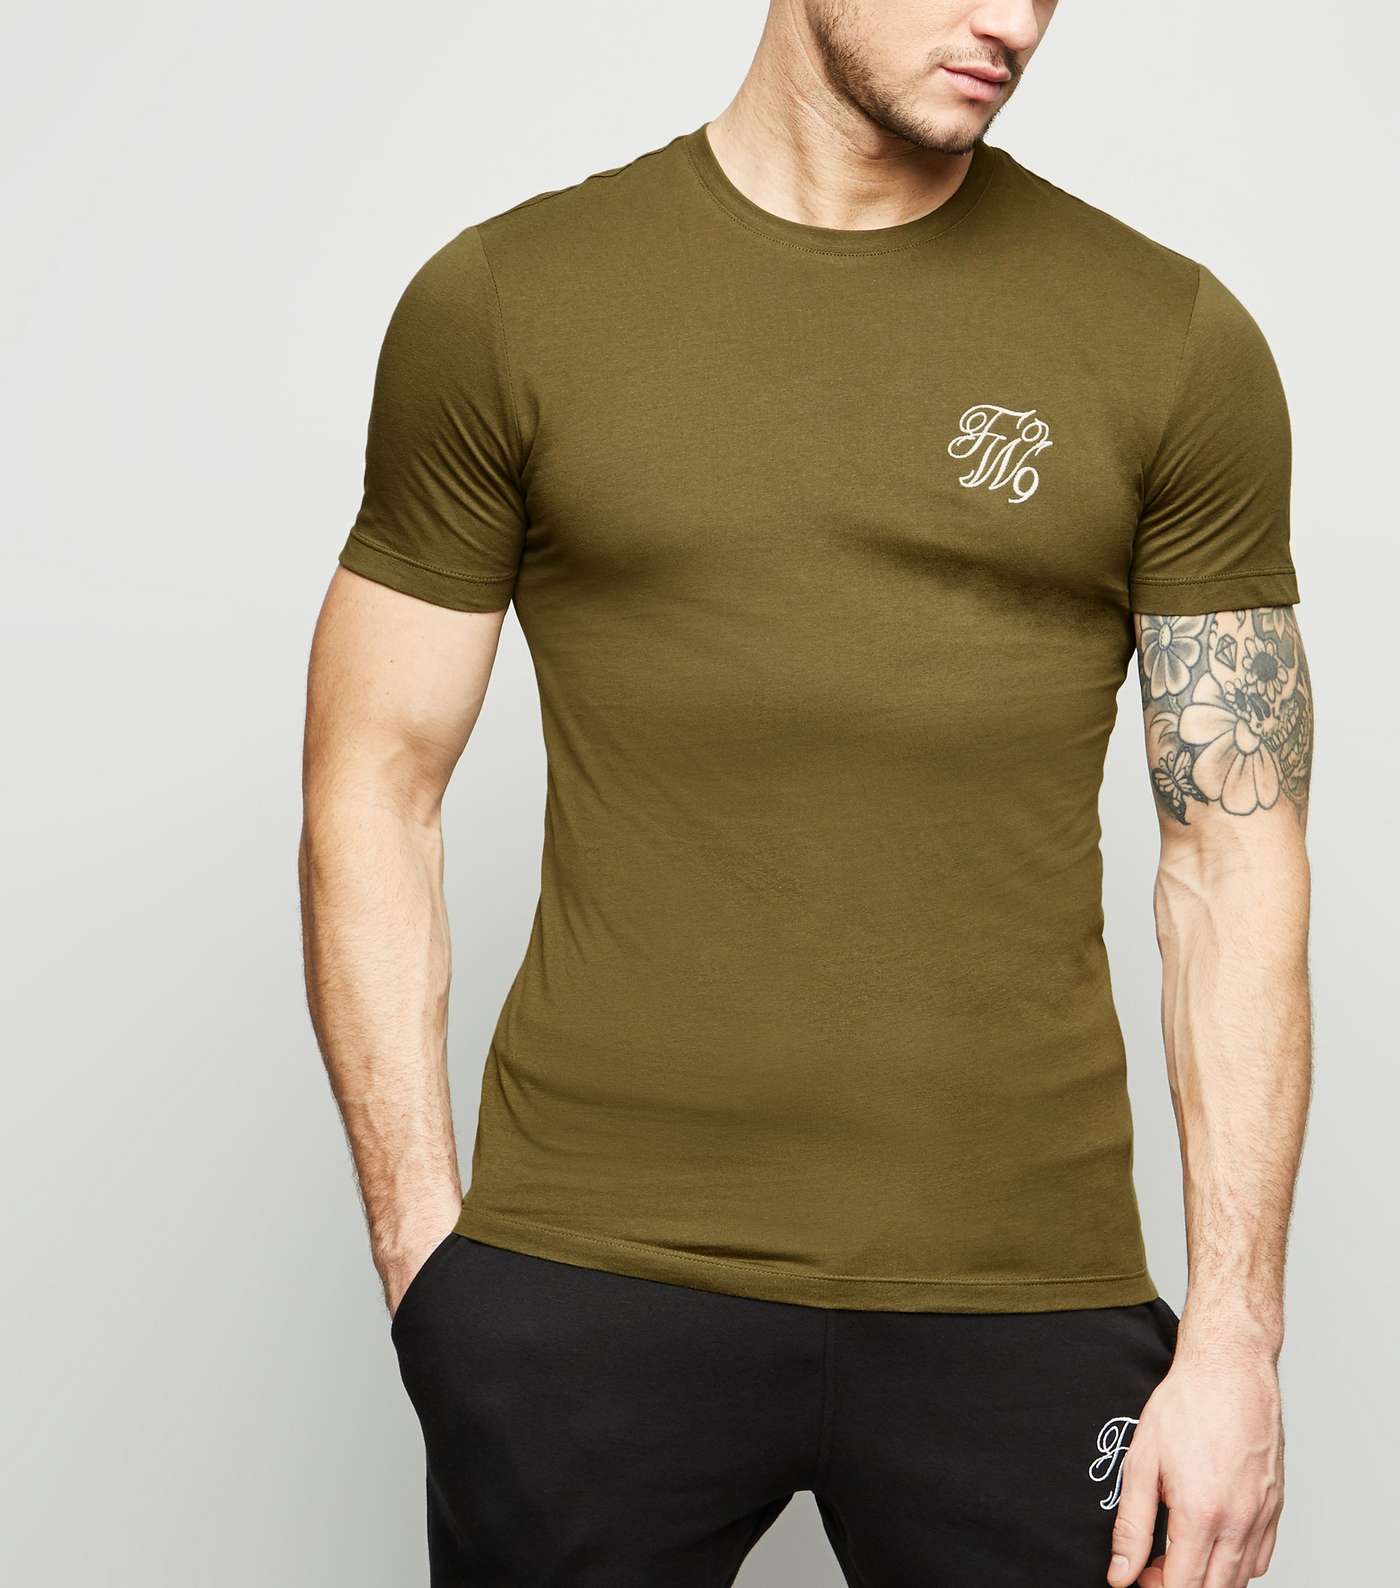 Green TW9 Embroidered Muscle Fit T-Shirt